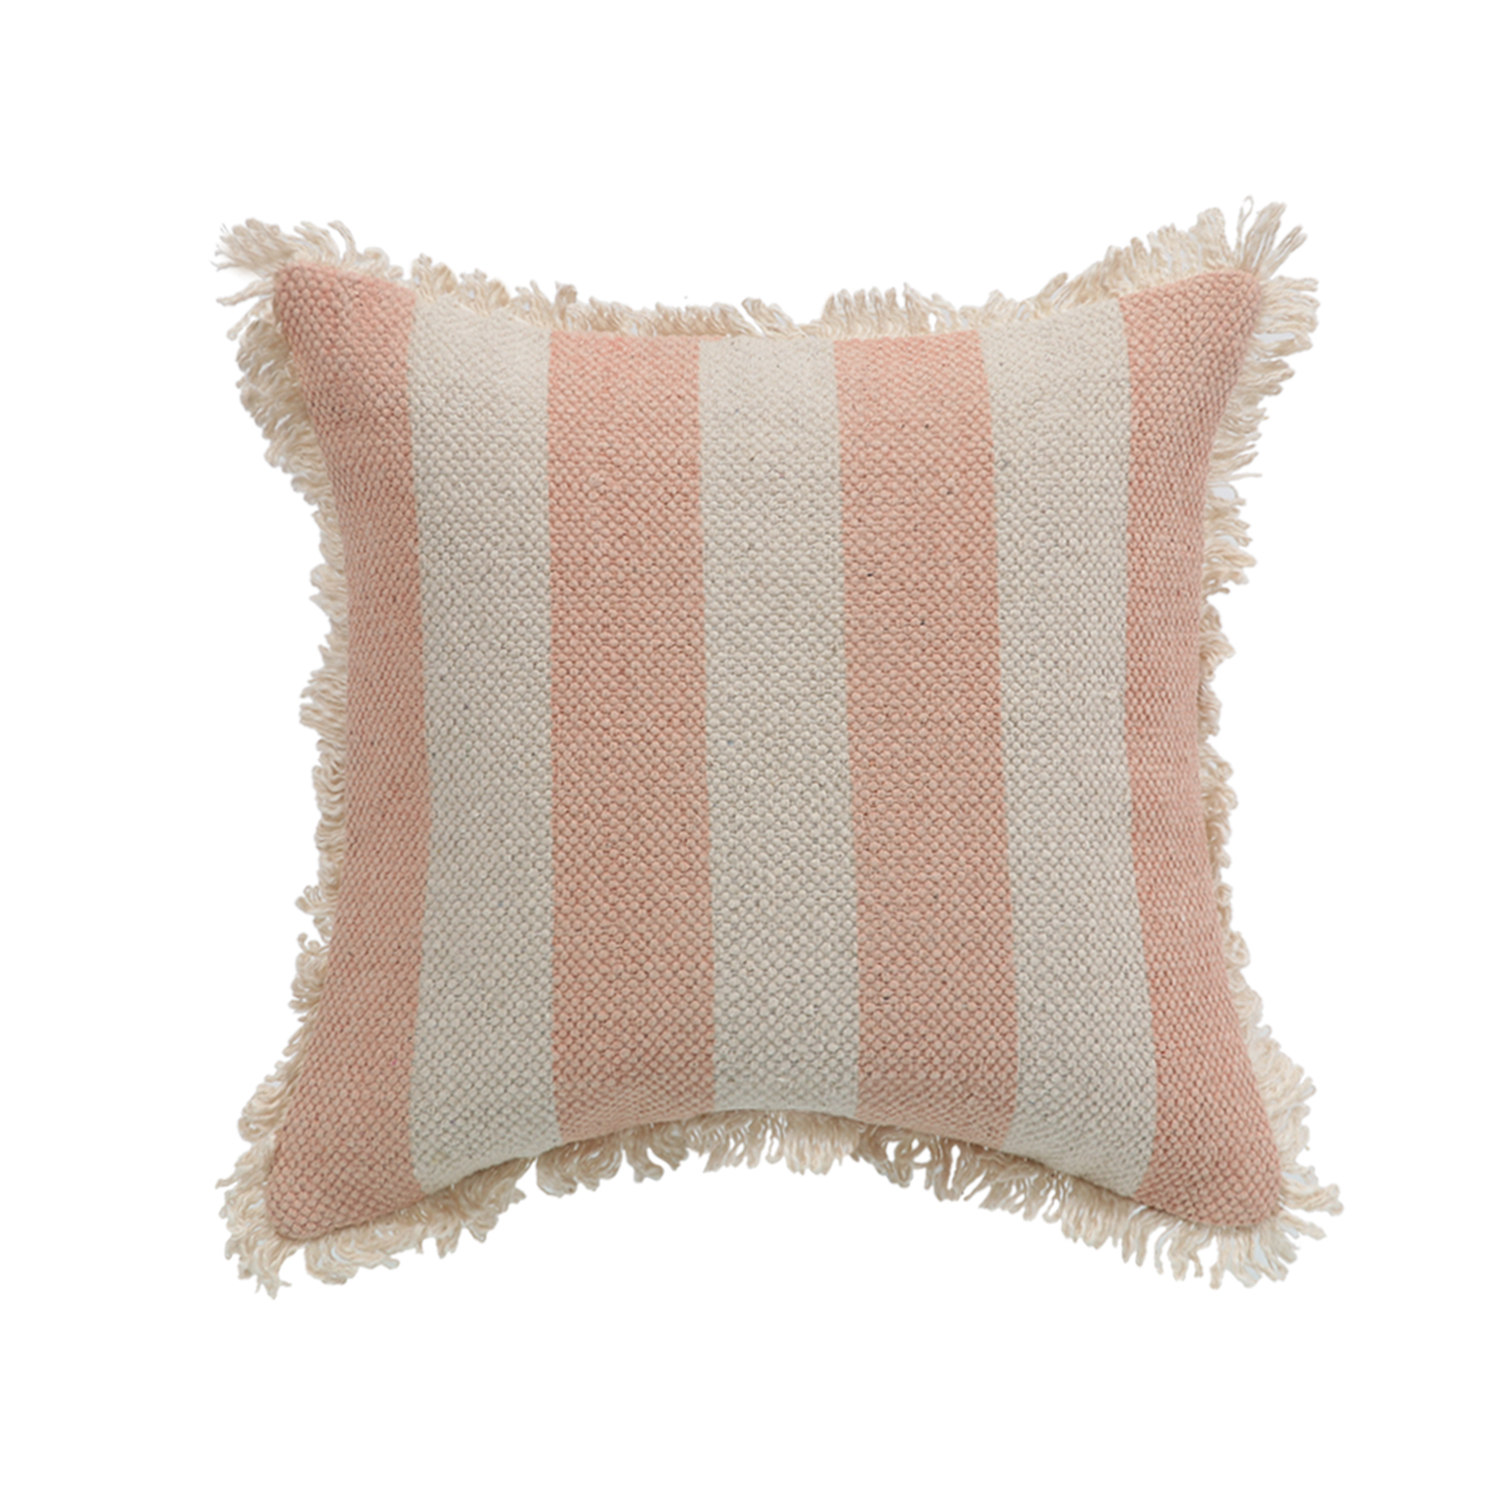 Printed Stripe Pink Cushions Covers with fringes 14X14 Inch